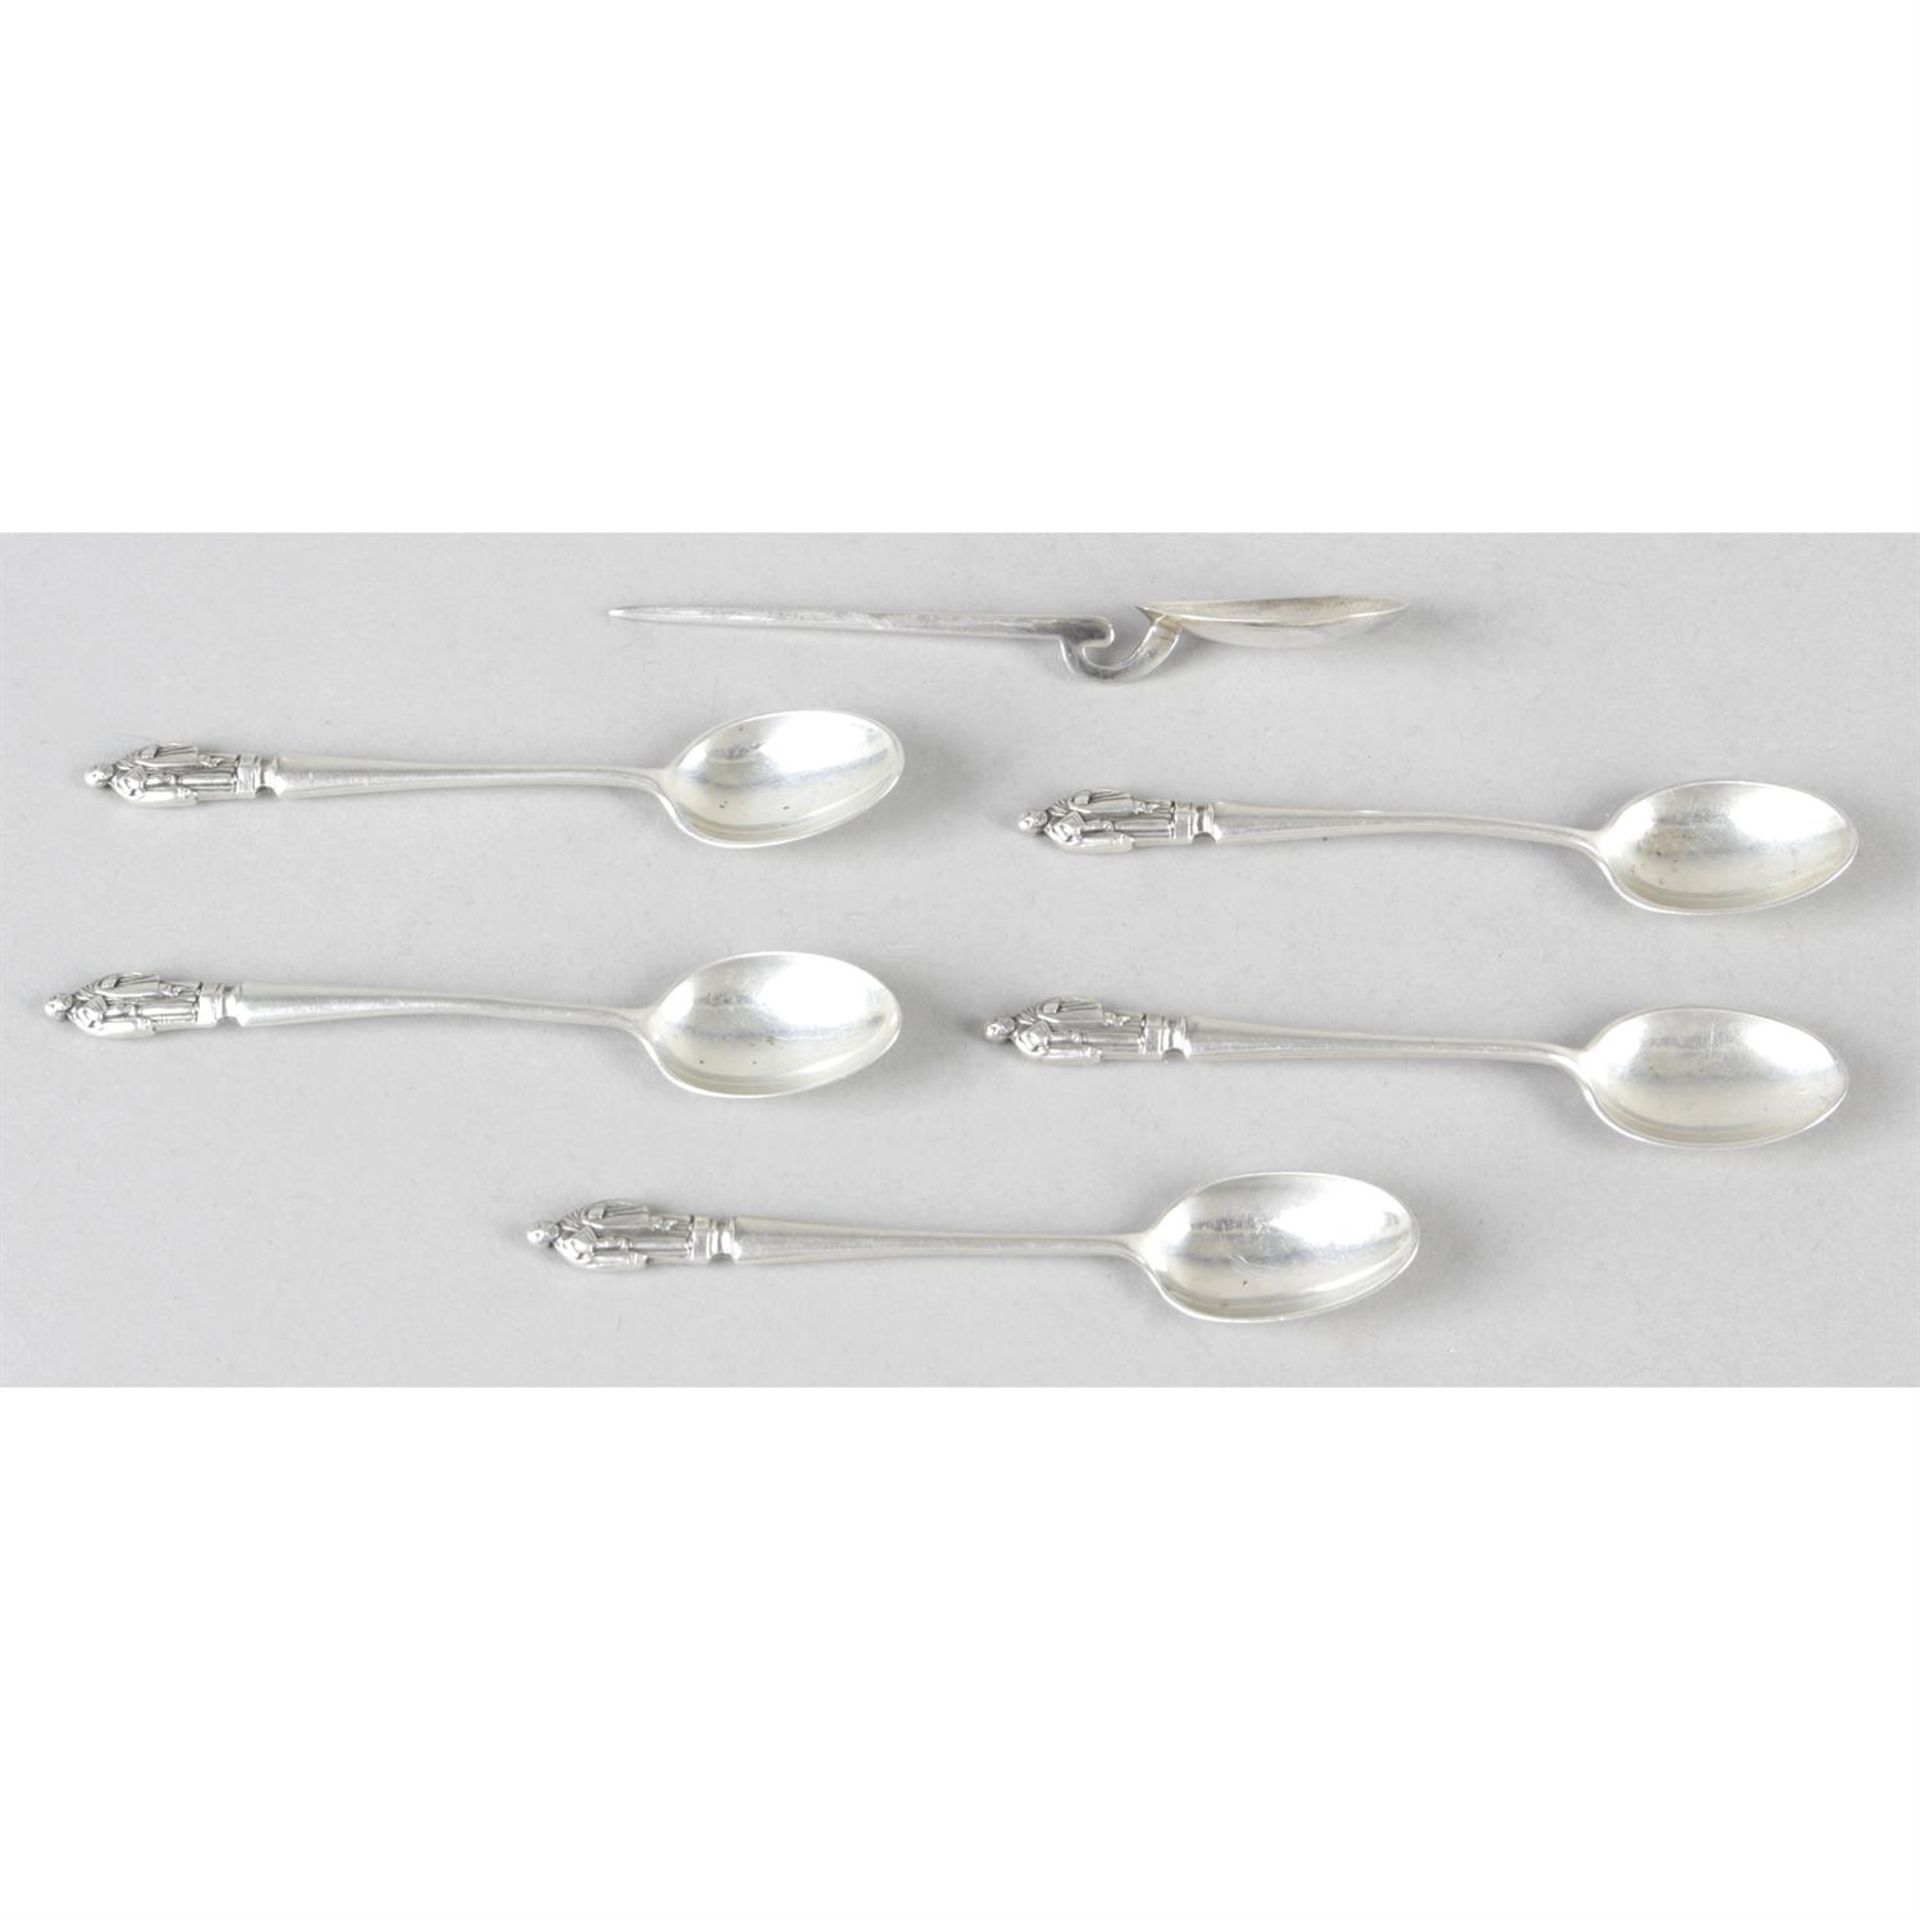 A selection of assorted spoons to include a reproduction Trefid spoon and Roman spoon,